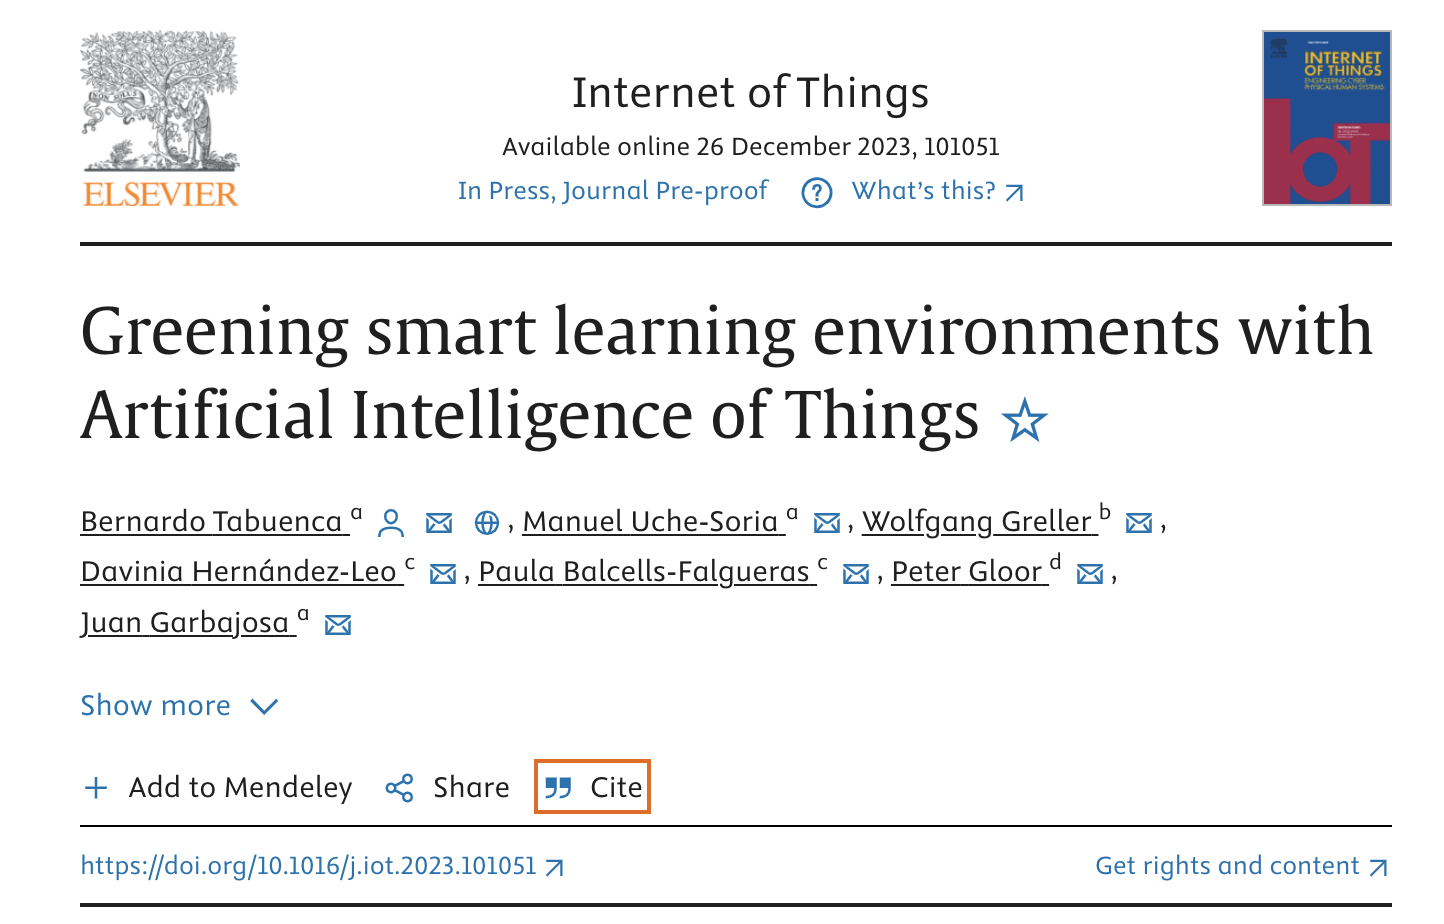 Just published! IoT, Greening smart learning environments with Artificial Intelligence of Things